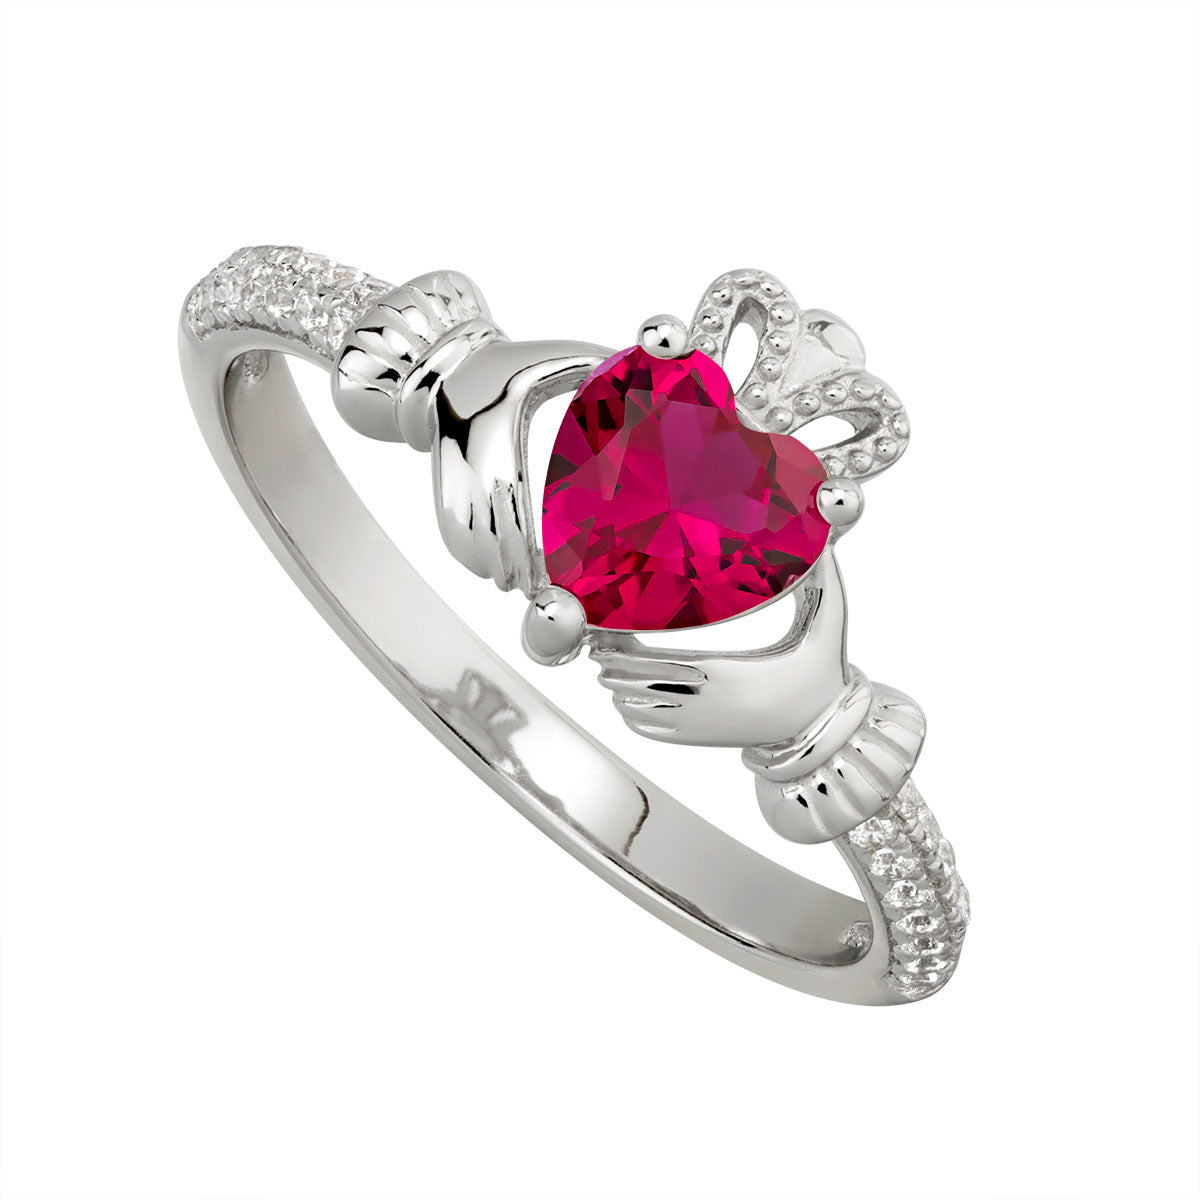 sterling silver claddagh ring july birthstone s2106207 from Solvar